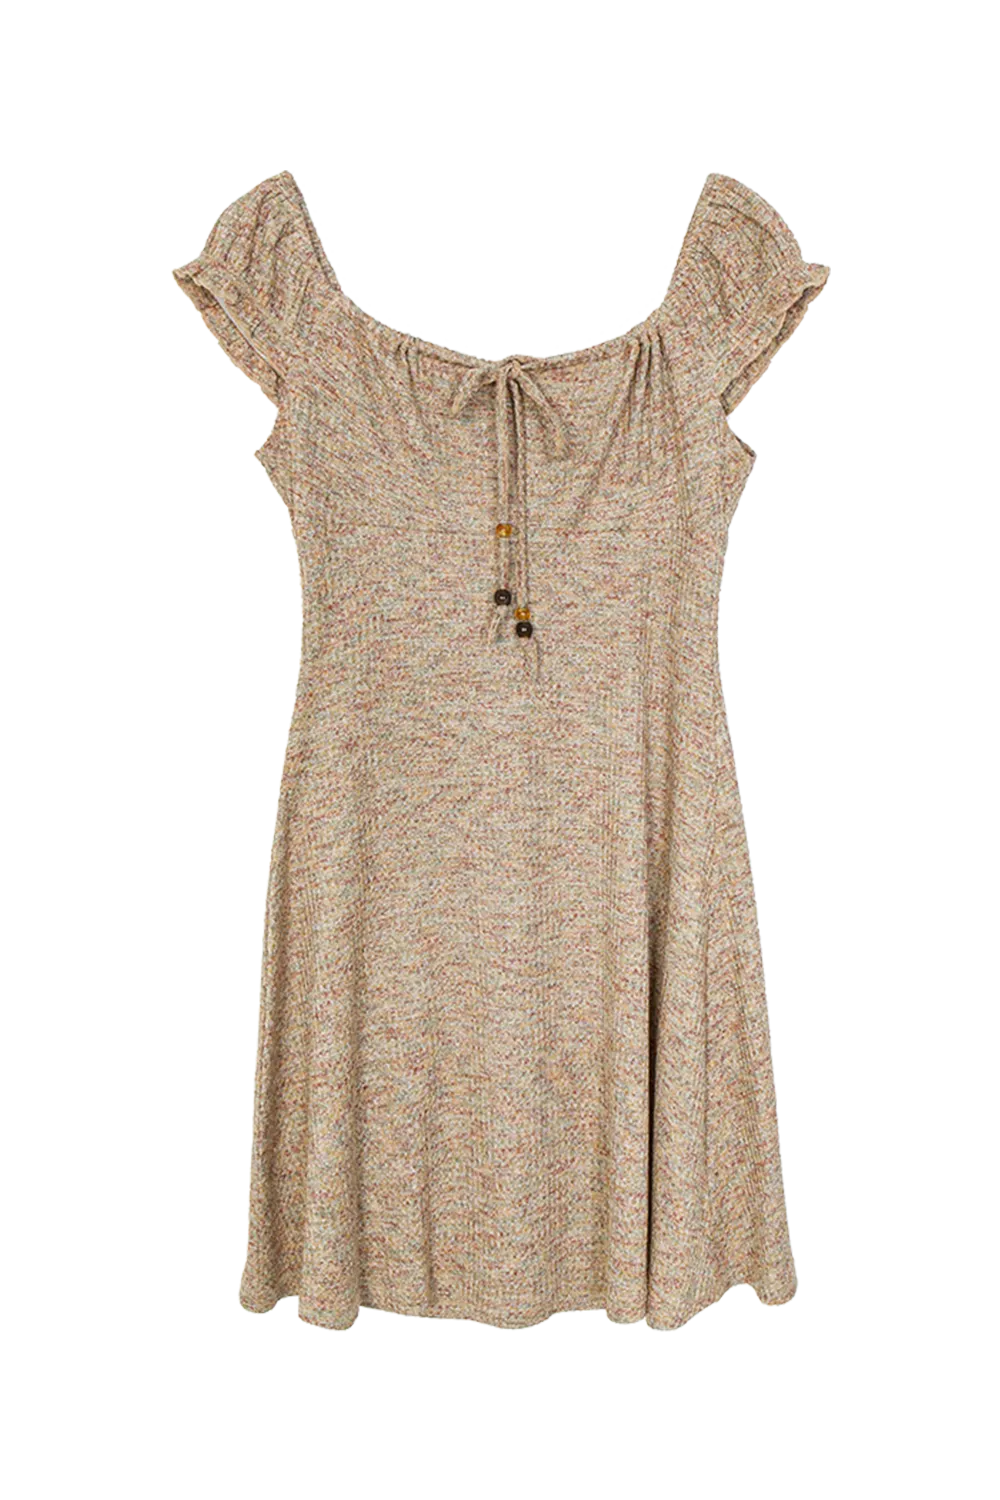 Women's Off-Shoulder Dress with Drawstring Neckline and Textured Fabric